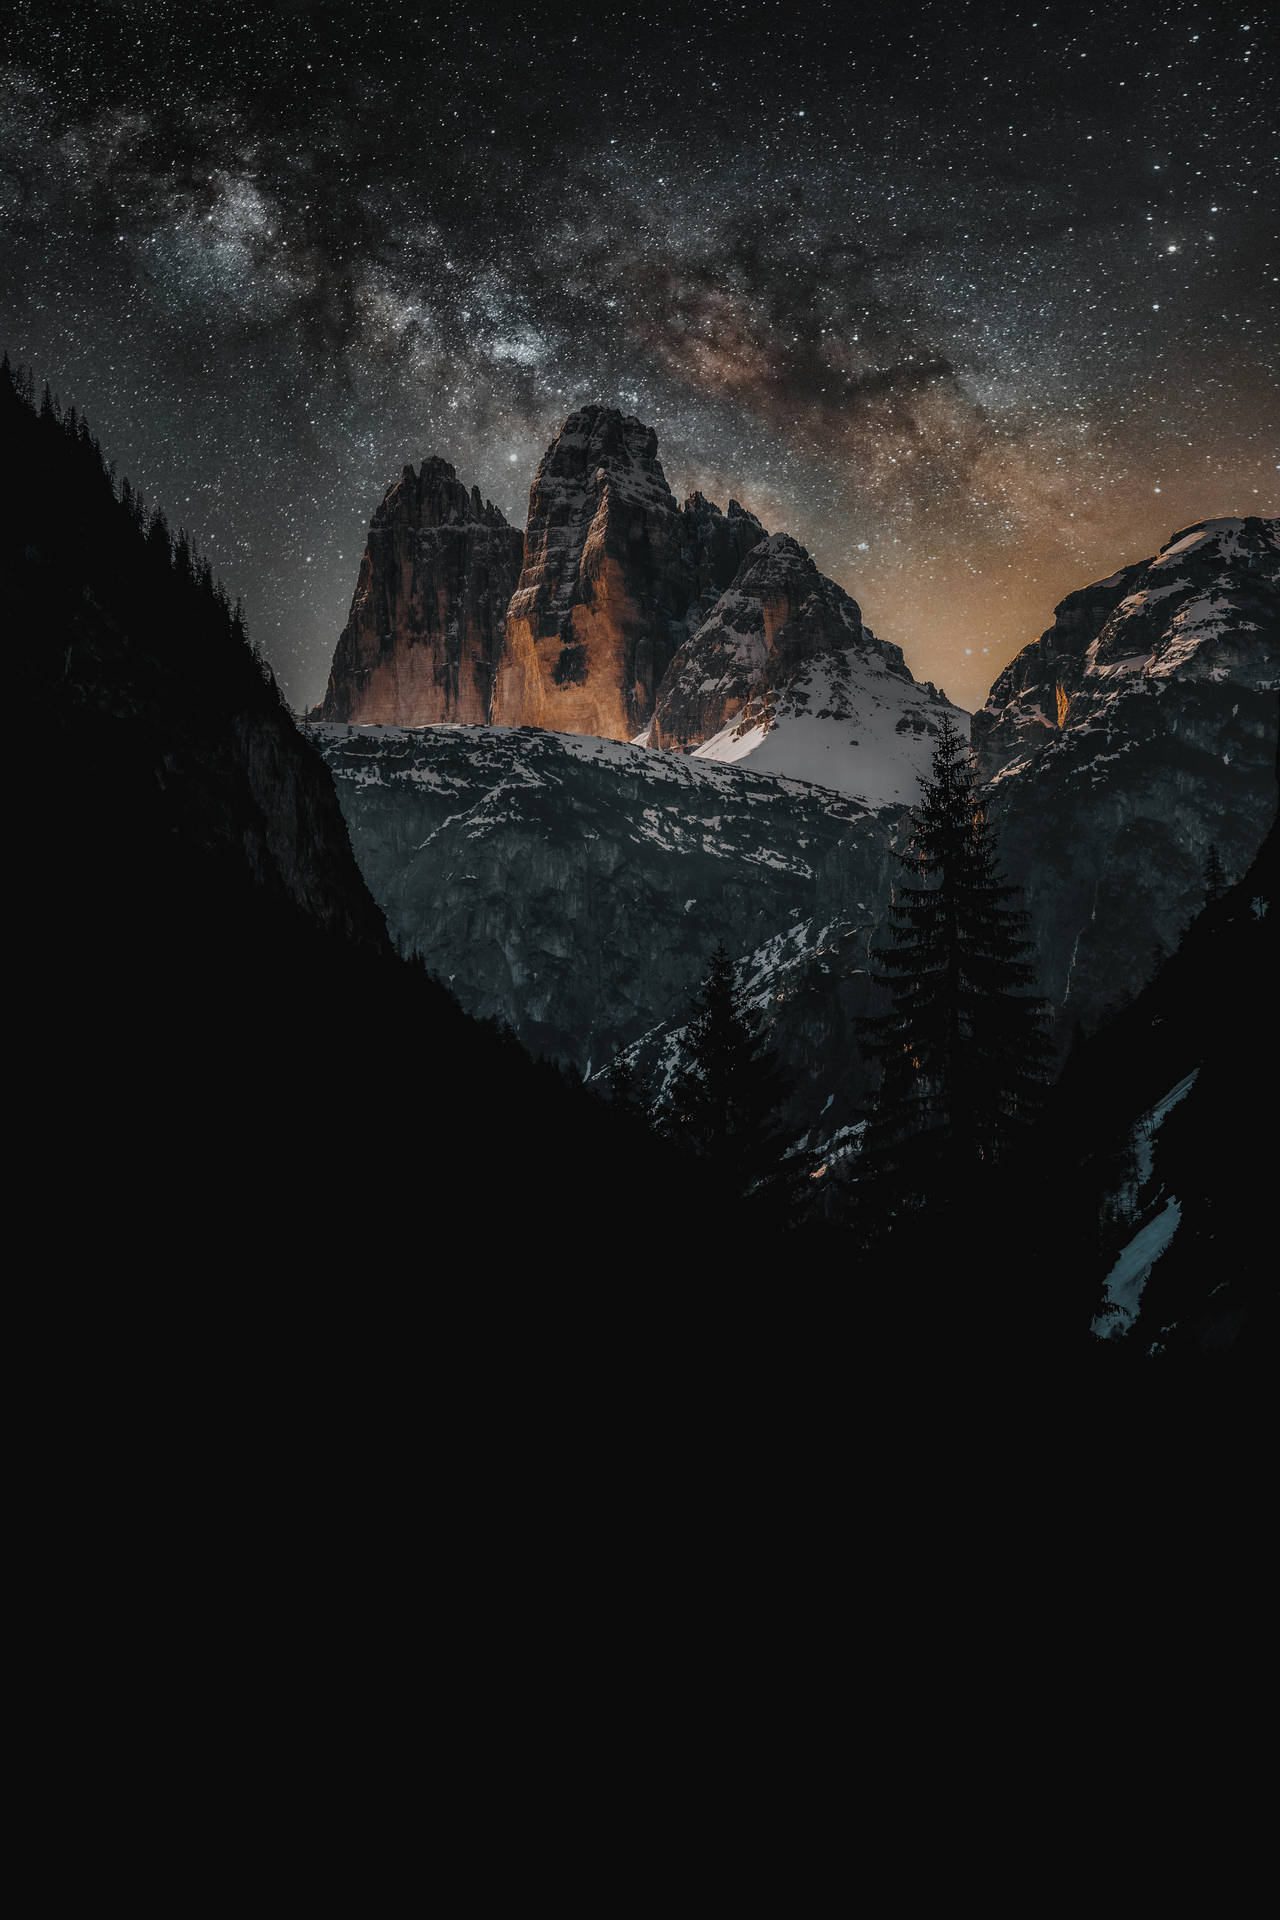 A majestic view of the night sky over a snow-capped mountain Wallpaper